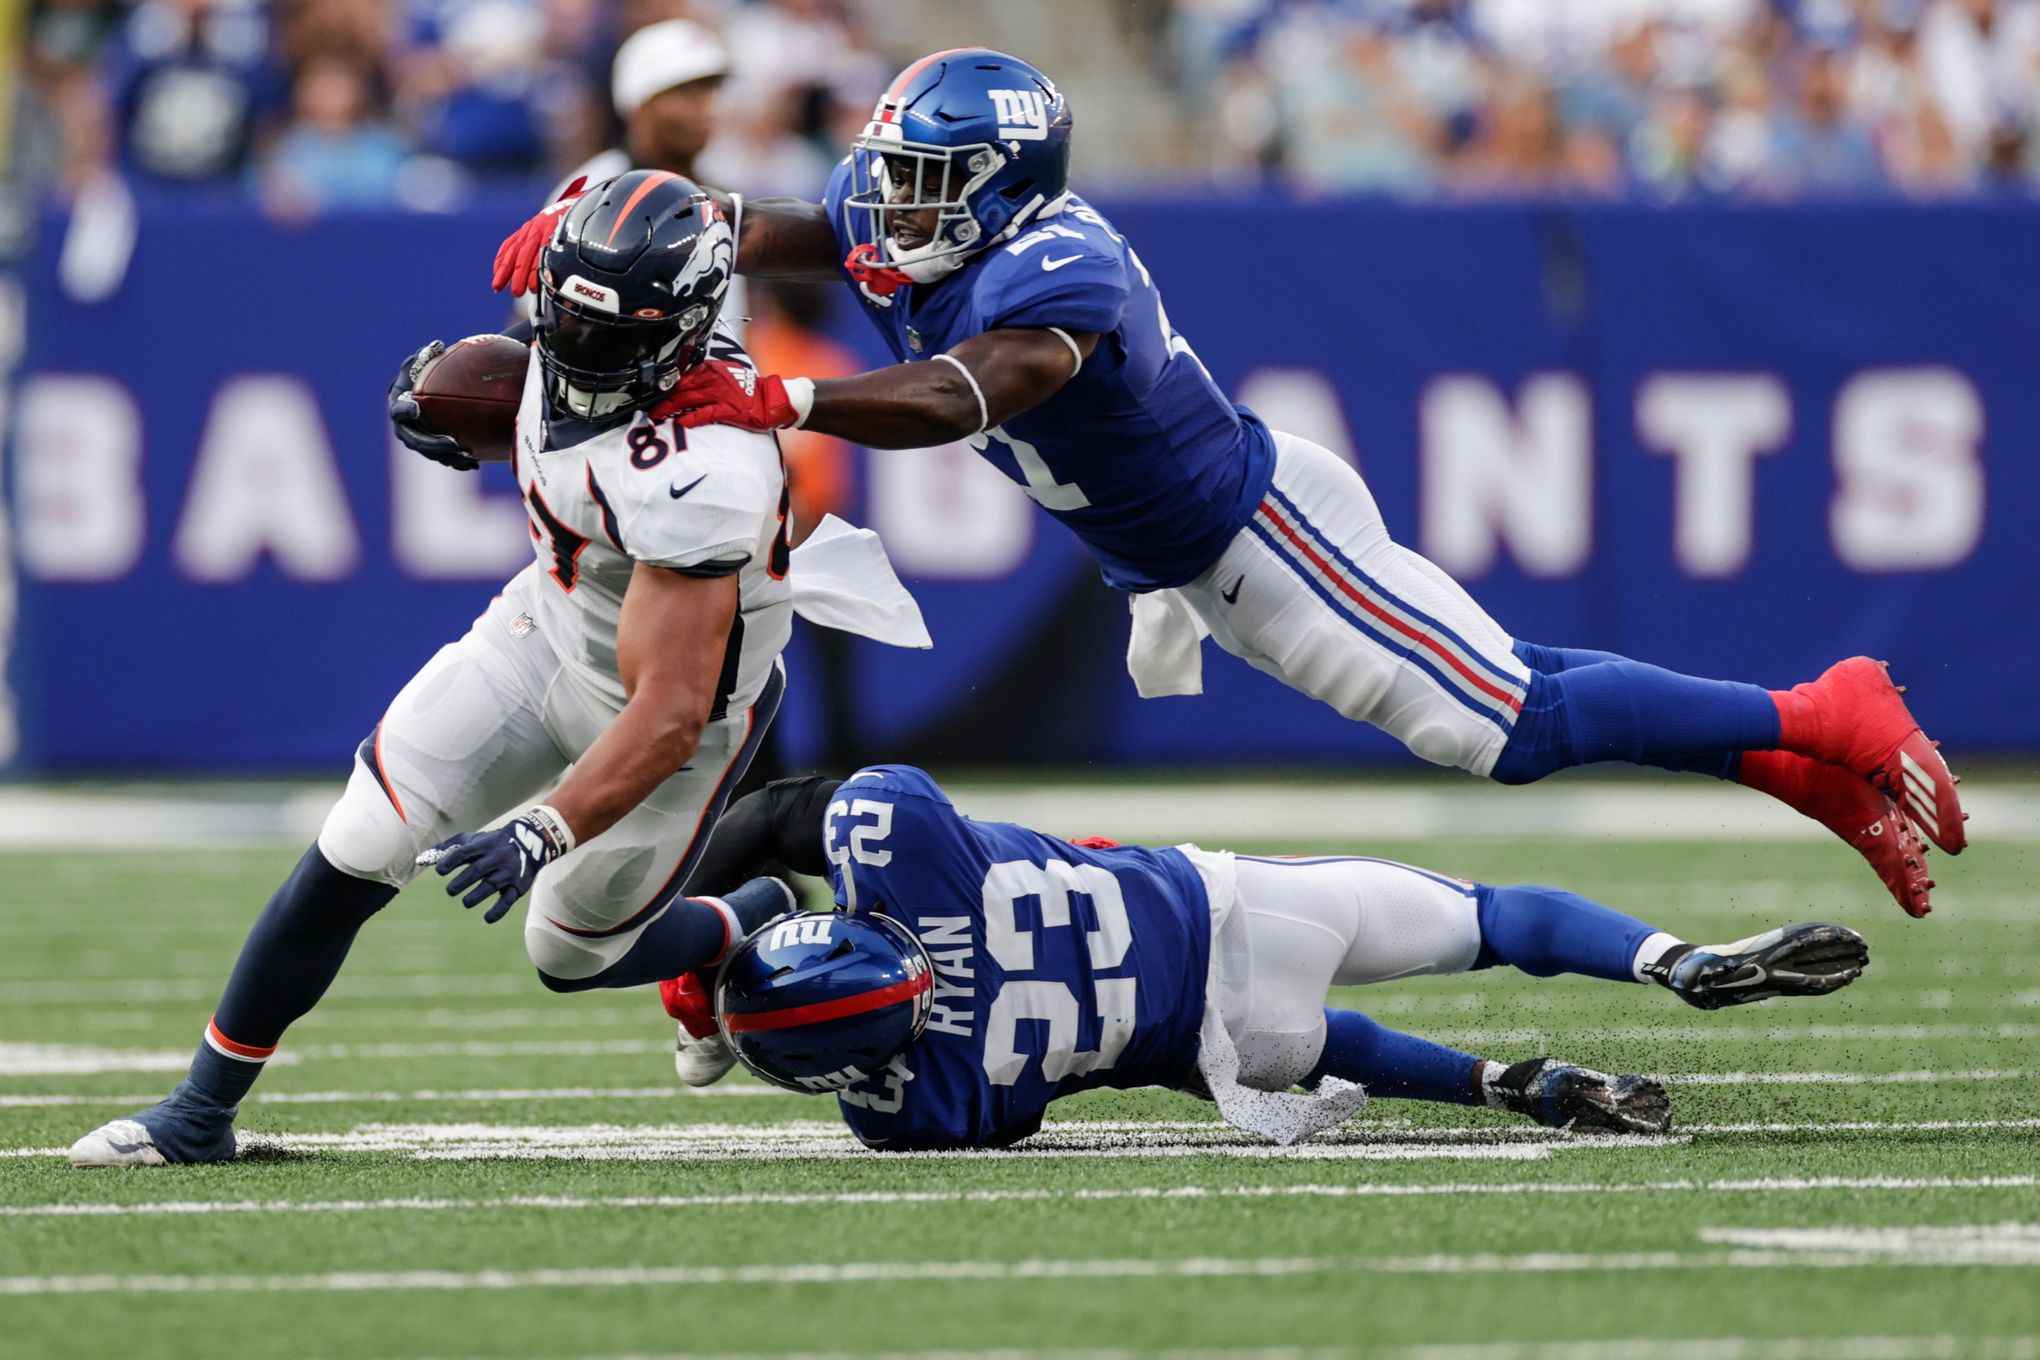 Giants vaunted D falters, fails to get off field vs. Broncos